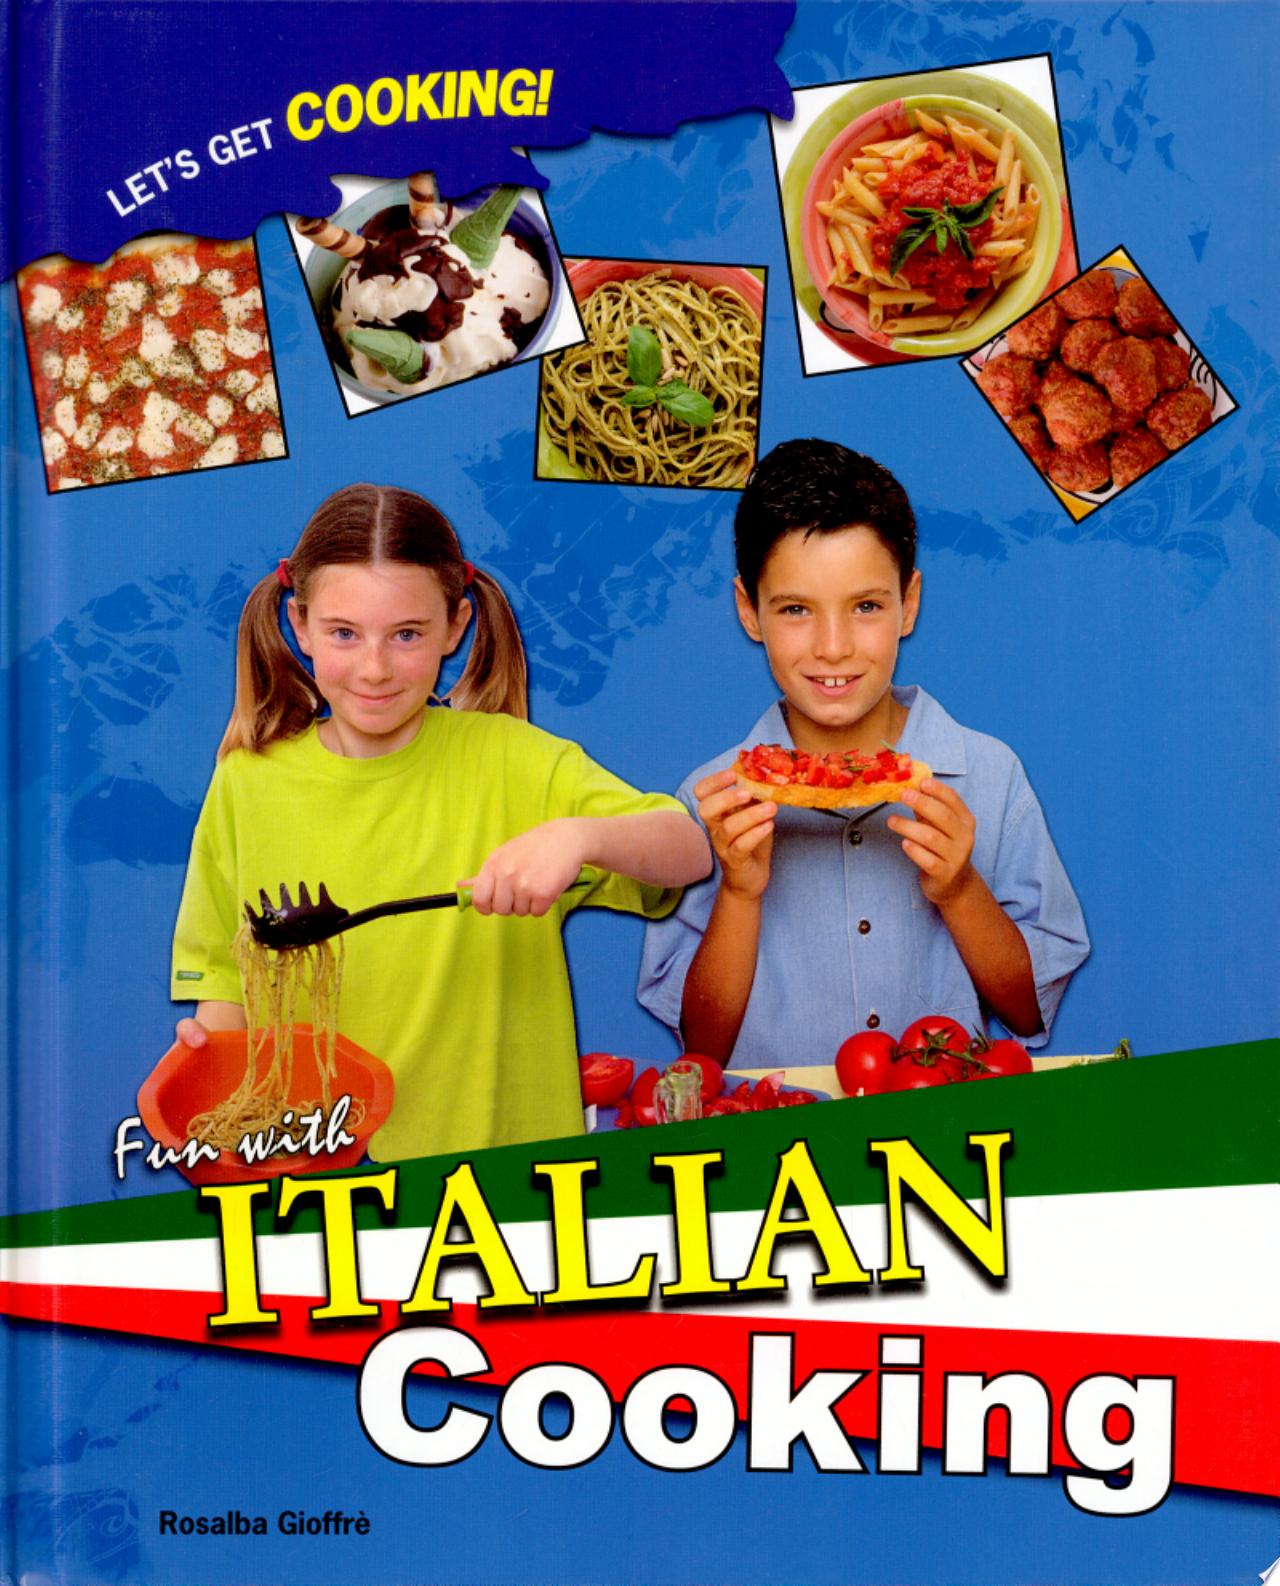 Image for "Fun with Italian Cooking"